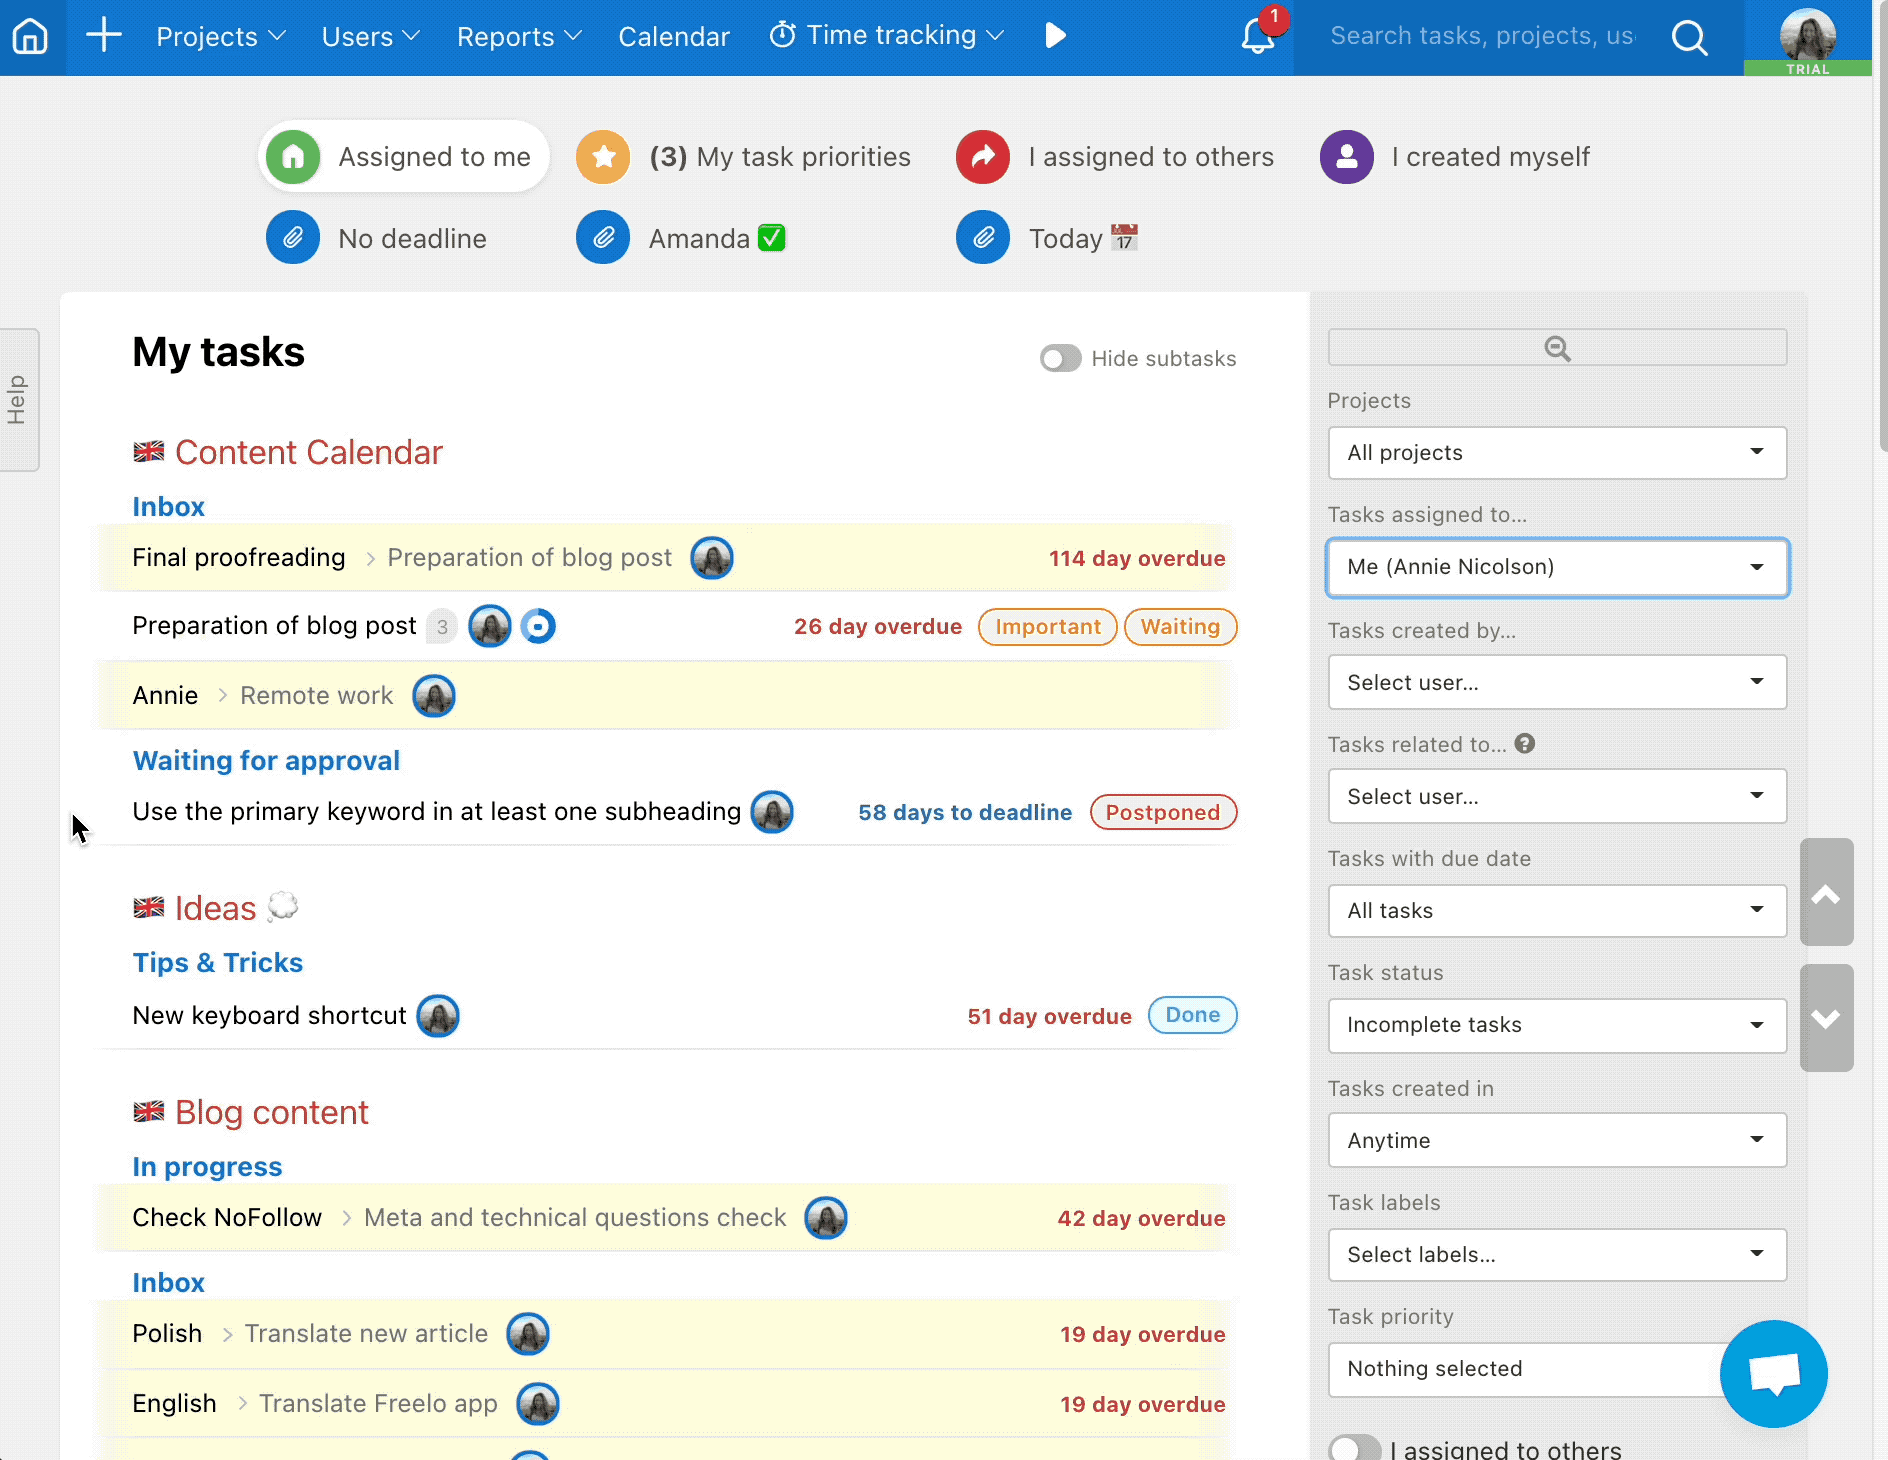 How to add a task to My task priorities on Dashboard.